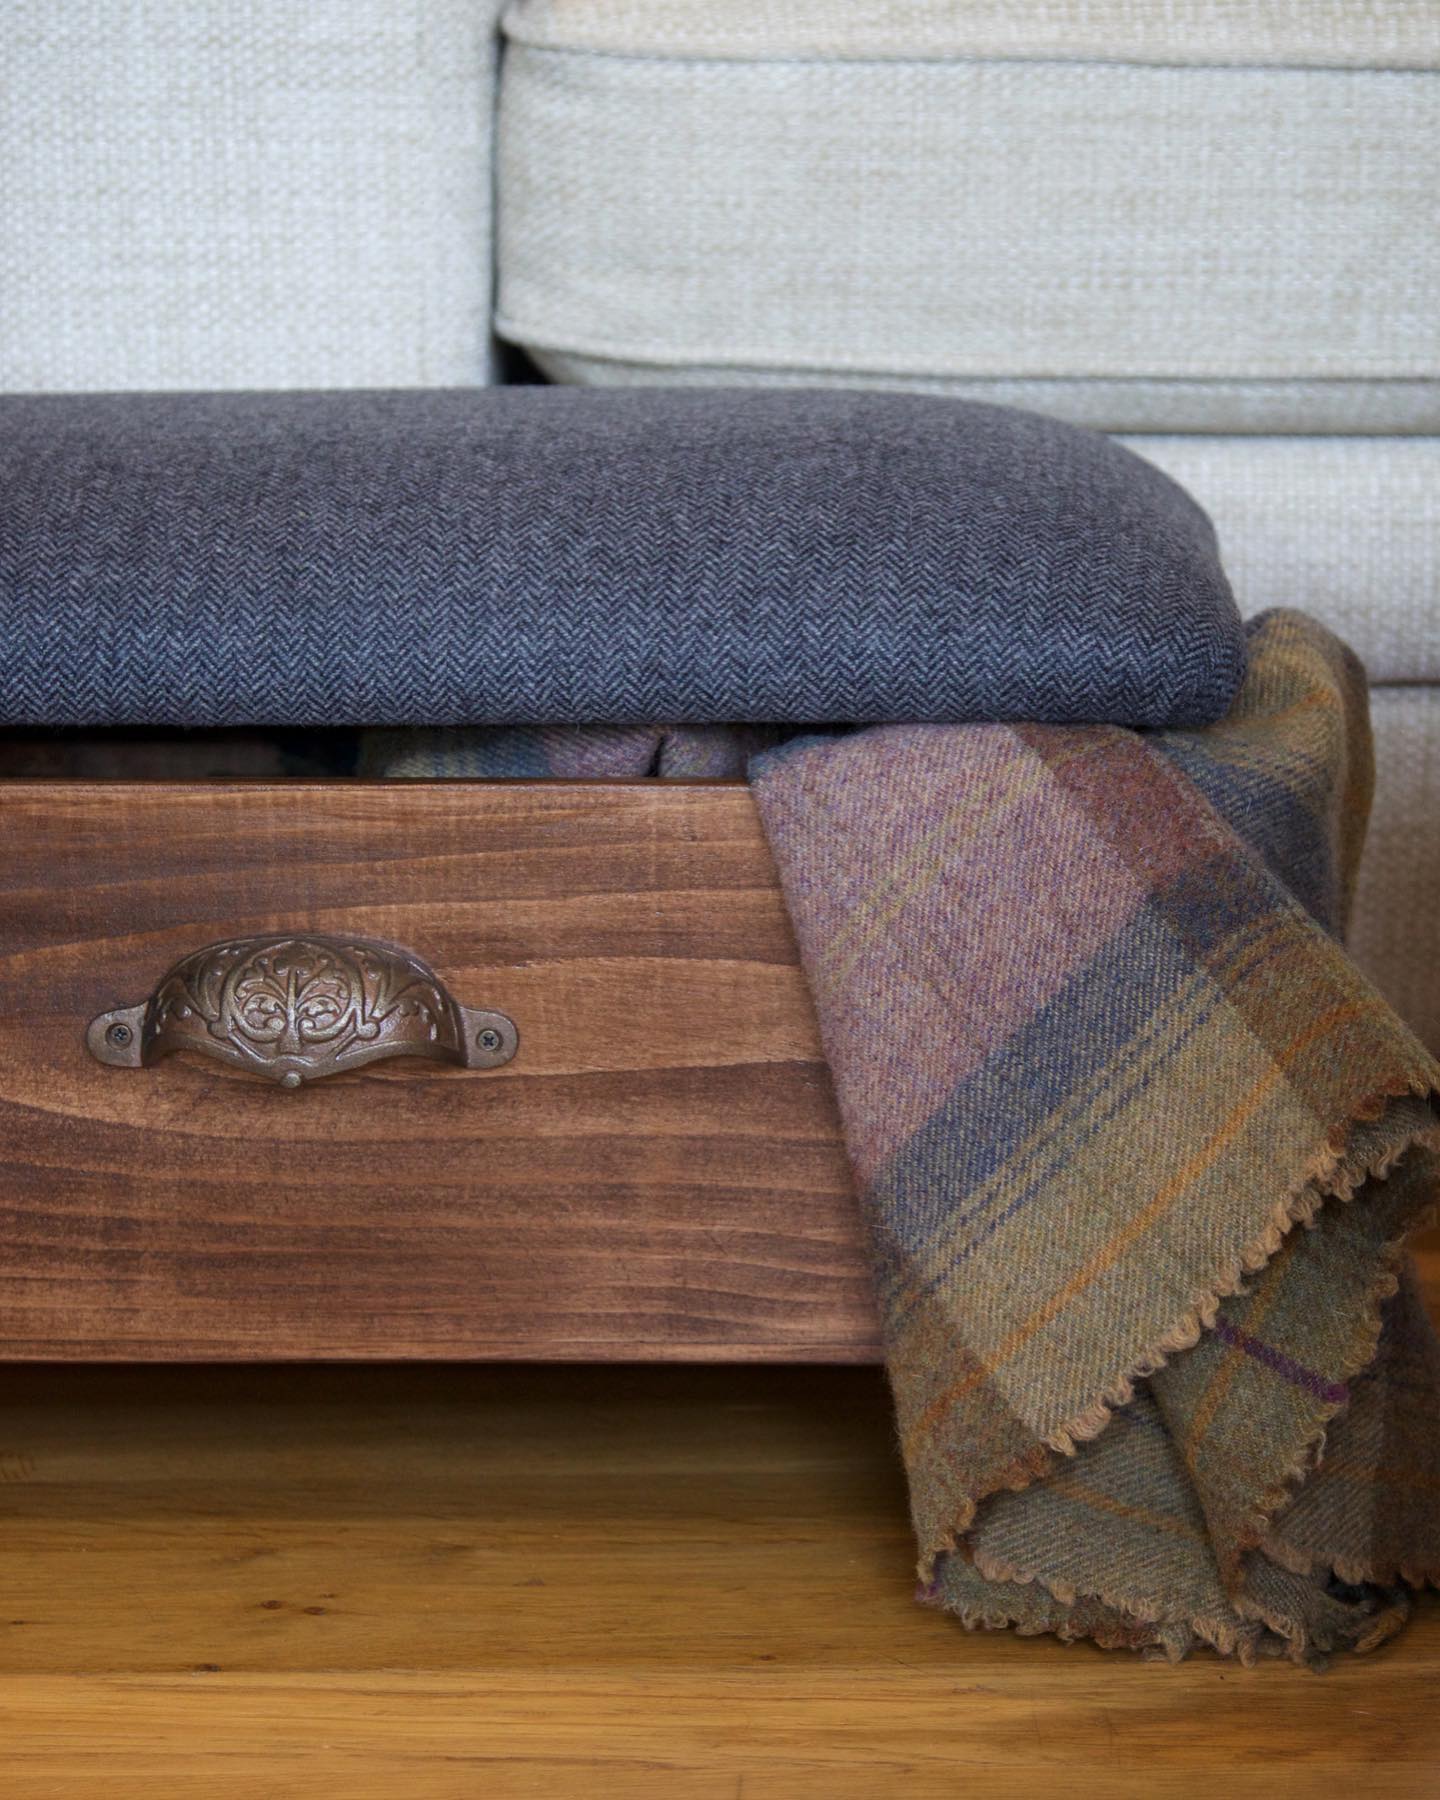 It’s that time of year when we are snuggling under blankets and enjoying those cosy warm fabrics. We love using Tweed and Checked fabrics on our ottomans and are currently preparing some lovely pieces for our next market in FebContact us directly to chat through fabric options for our Bespoke ottomans ..#handcrafted #homedecor homewares#Tweed #check #wool #blanket #winternights #storage #upholstery #lifestyle #livingroomdecor